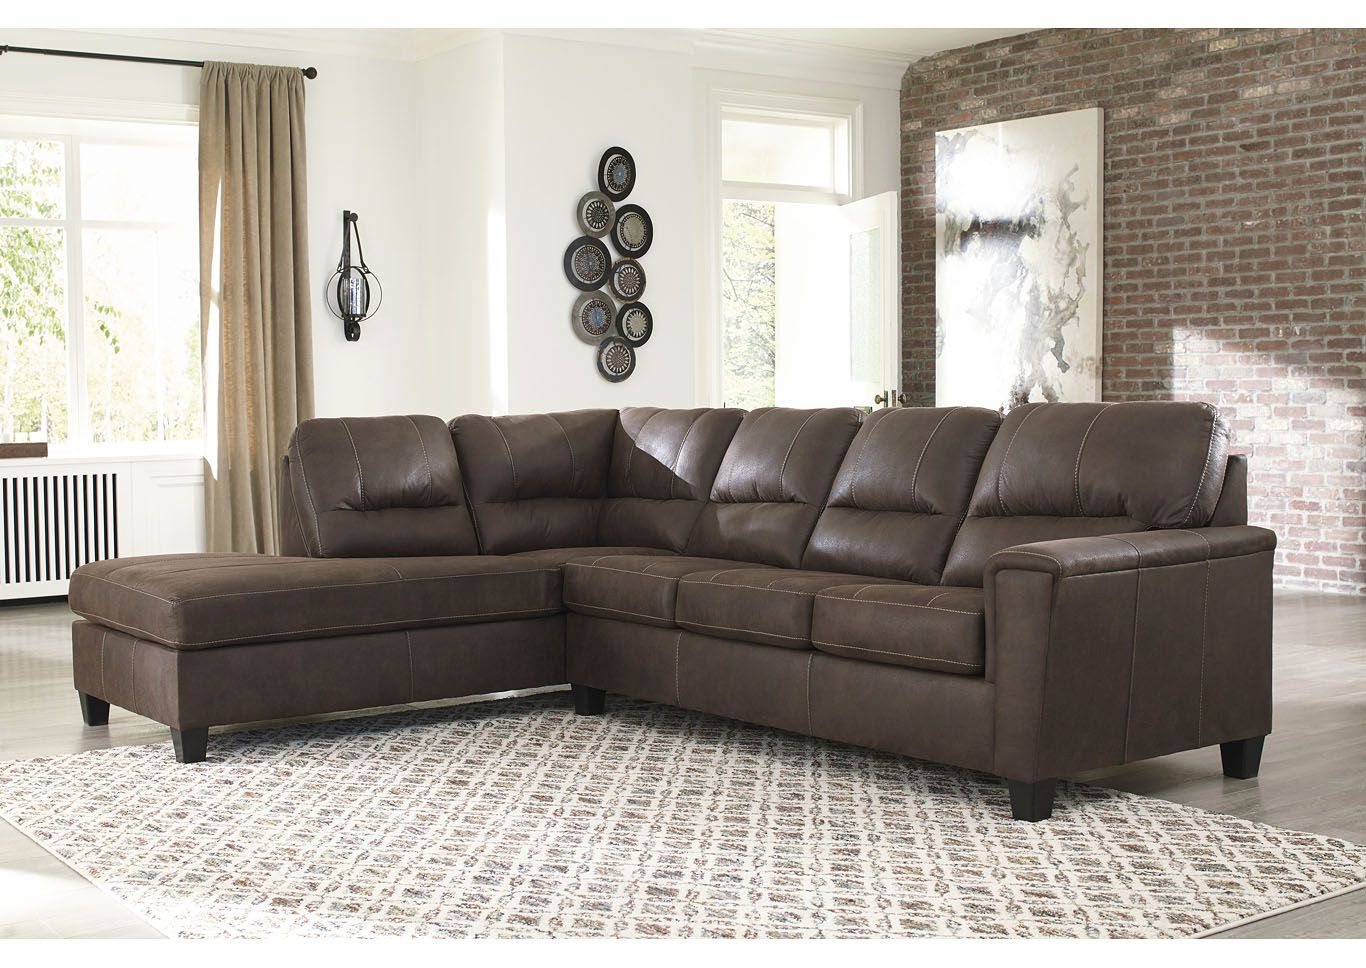 Navi Chestnut Left Arm Facing Sofa Chaise All Brands Inside 2Pc Maddox Left Arm Facing Sectional Sofas With Chaise Brown (View 2 of 15)